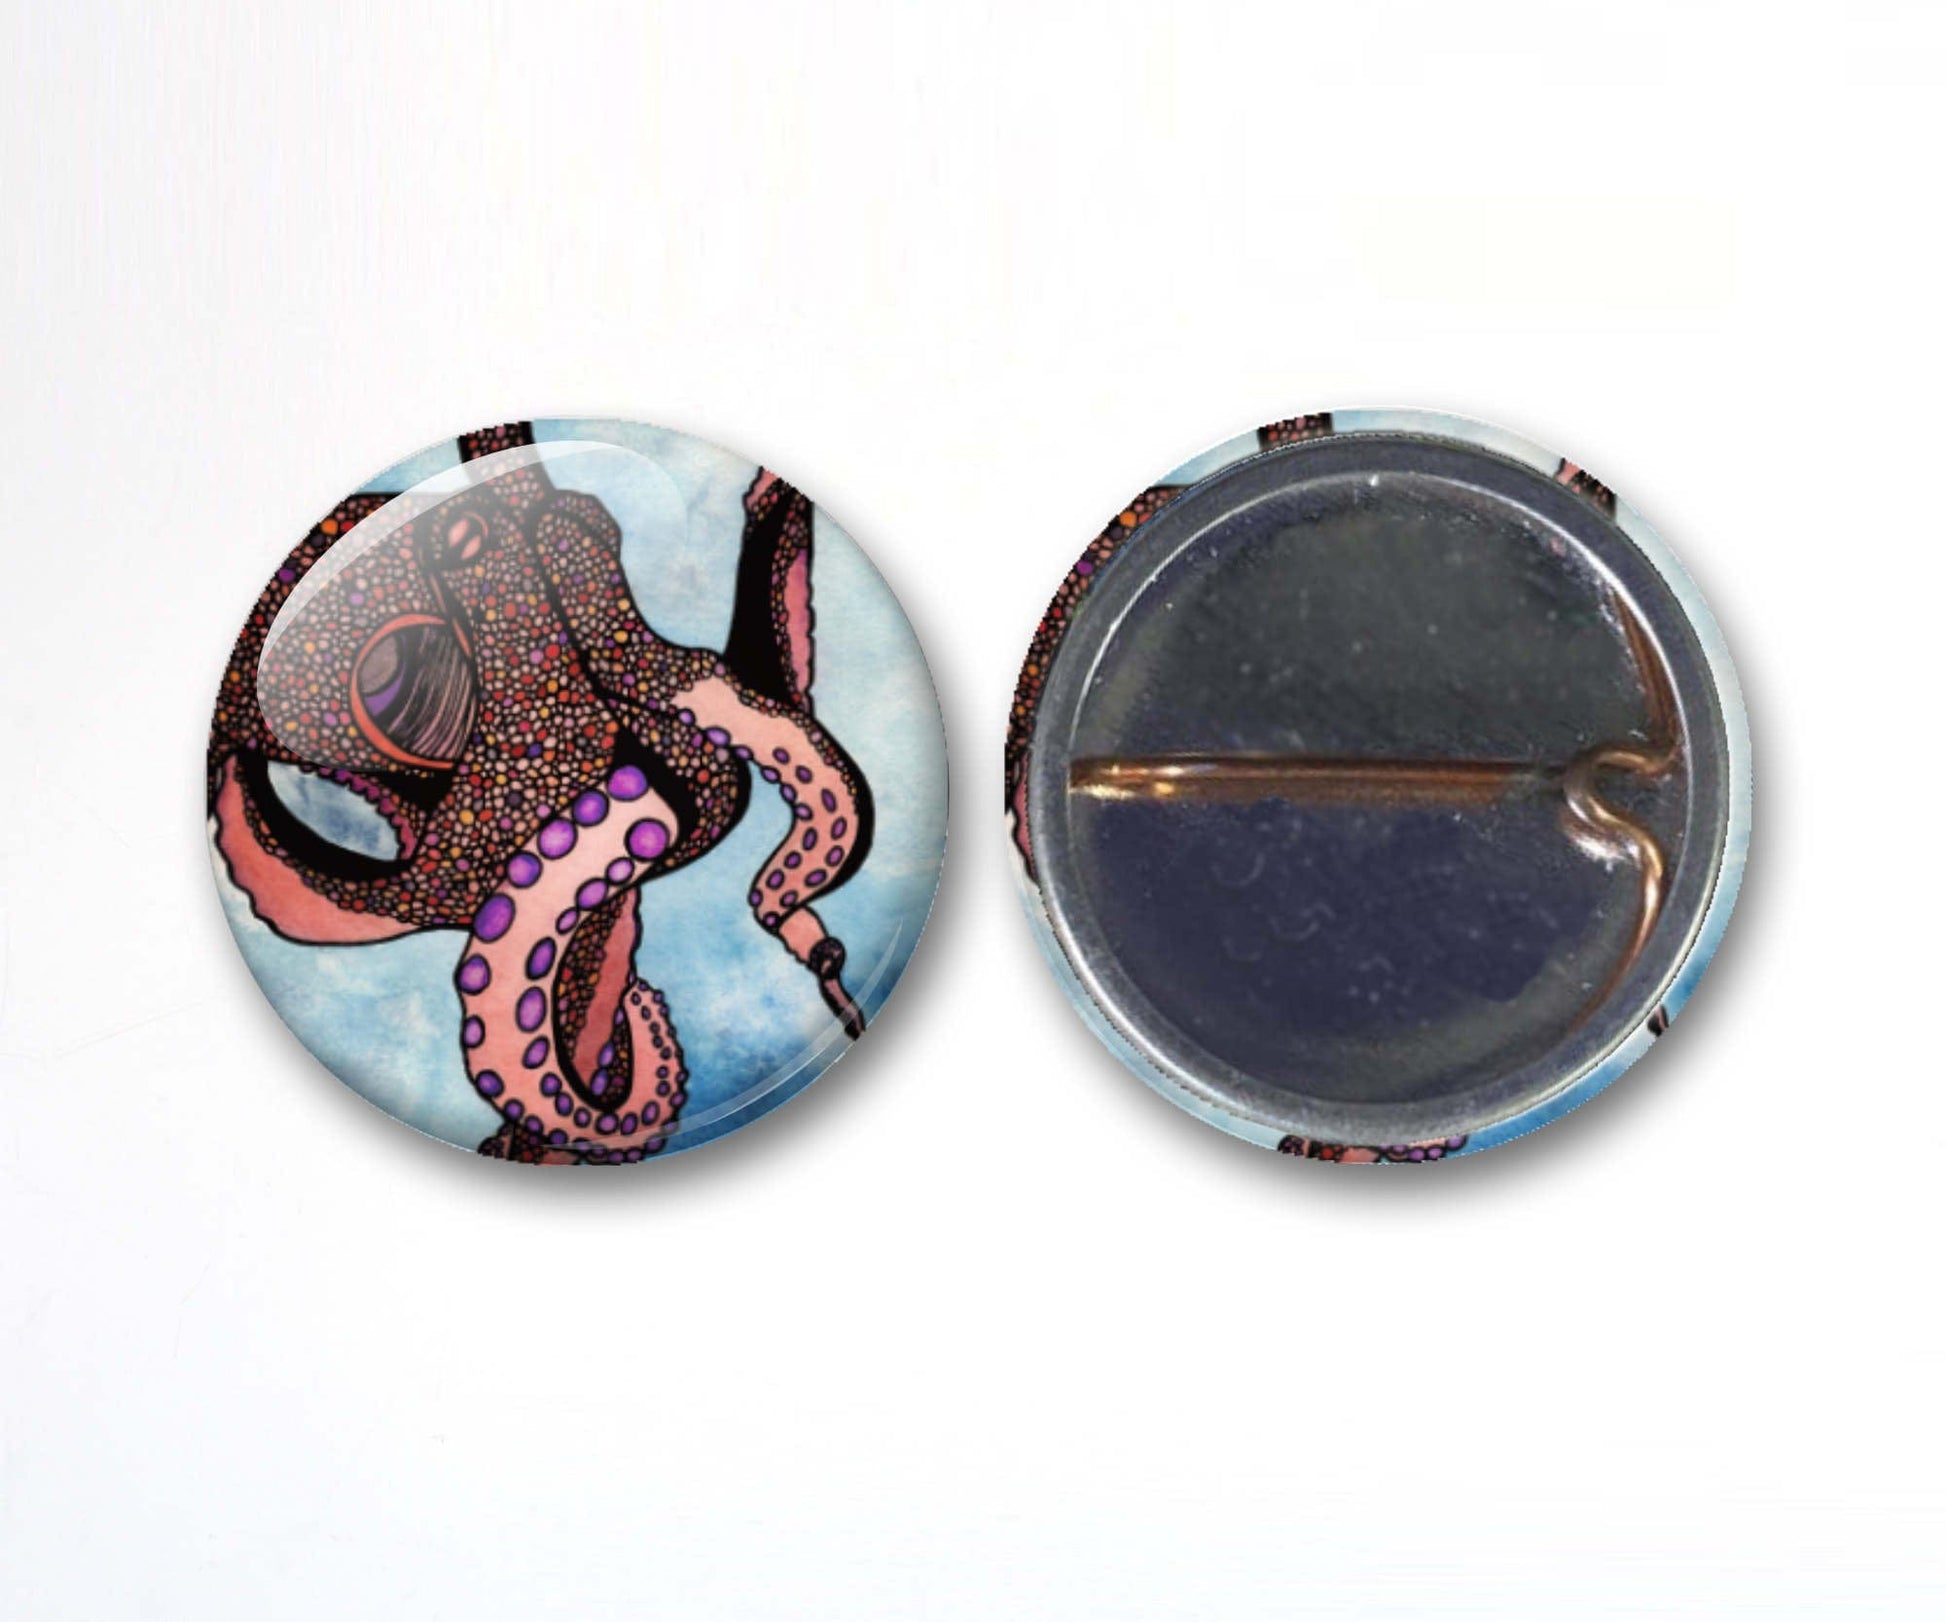 PinkPolish Design Buttons "Adventurous Octopus" Button Pack - 3-Pack Pin Back Button, 1 Inch